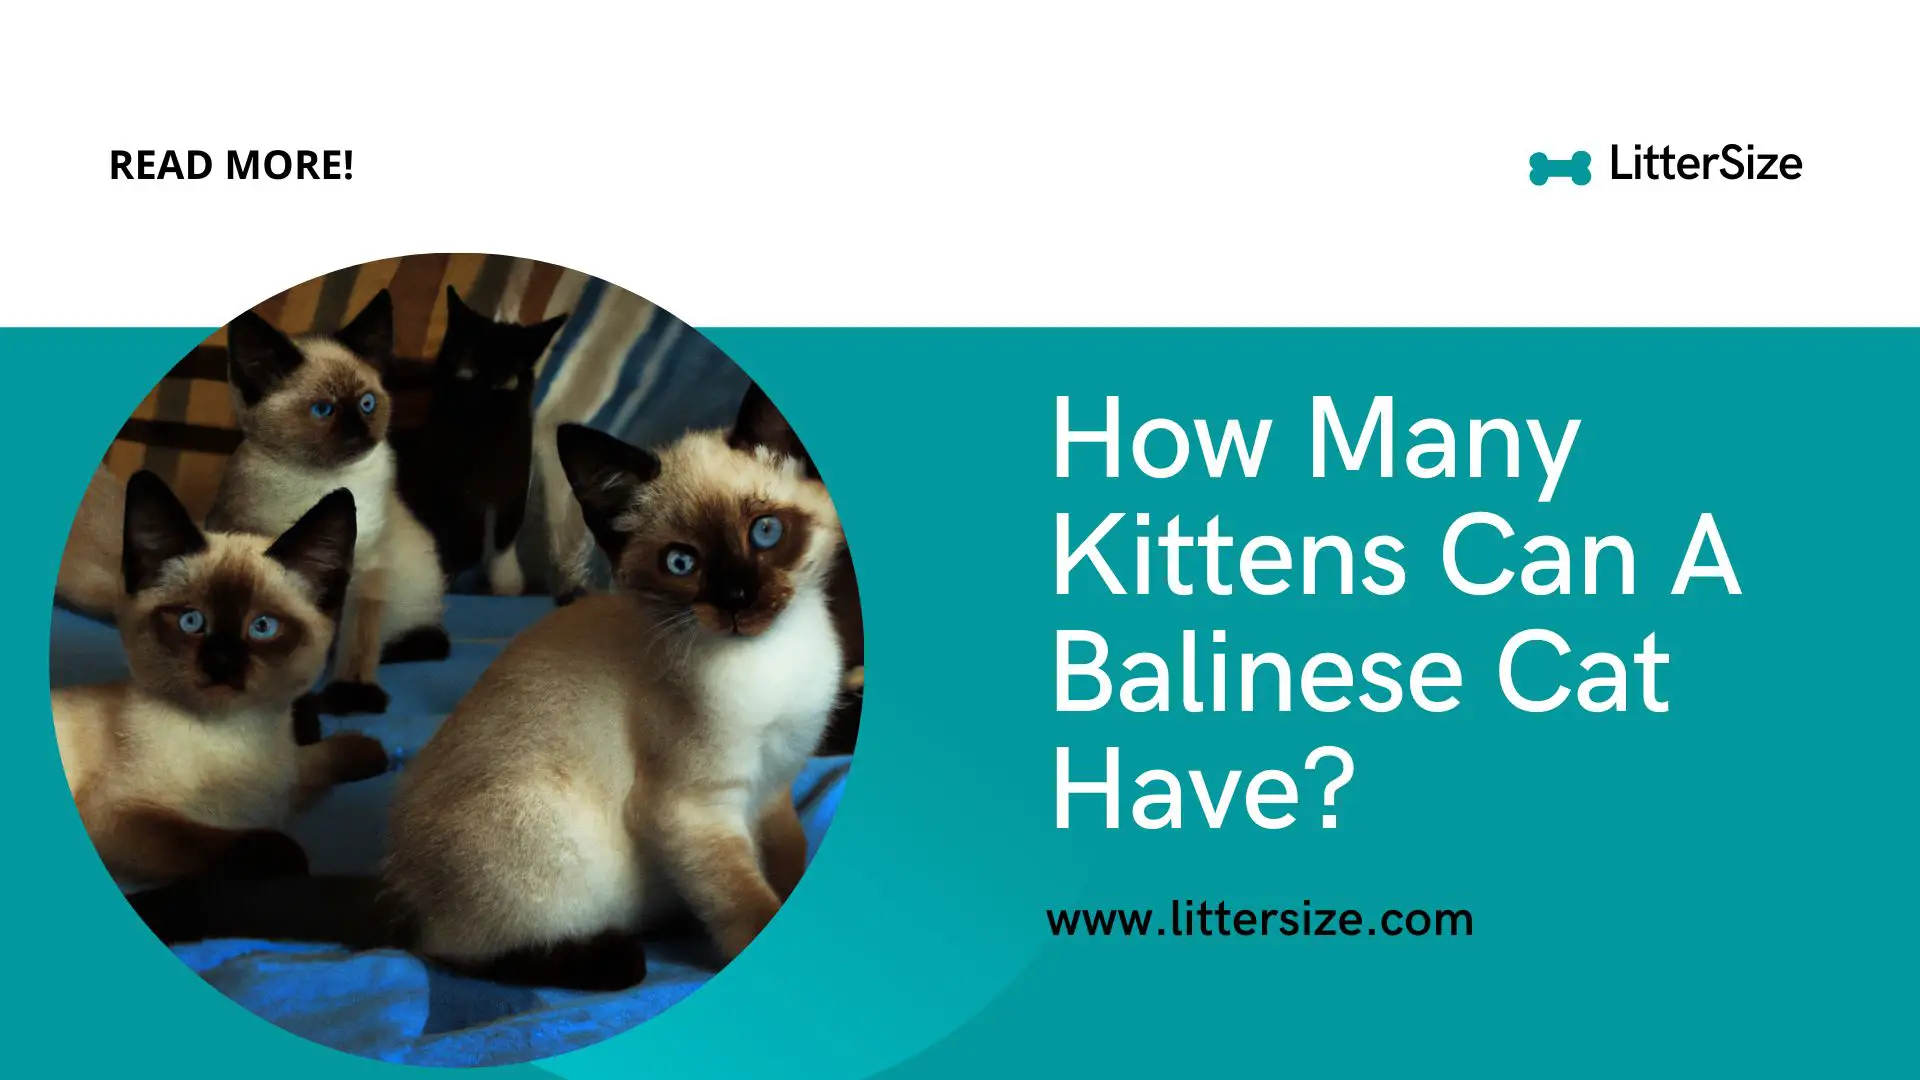 How Many Kittens Can A Balinese Cat Have?